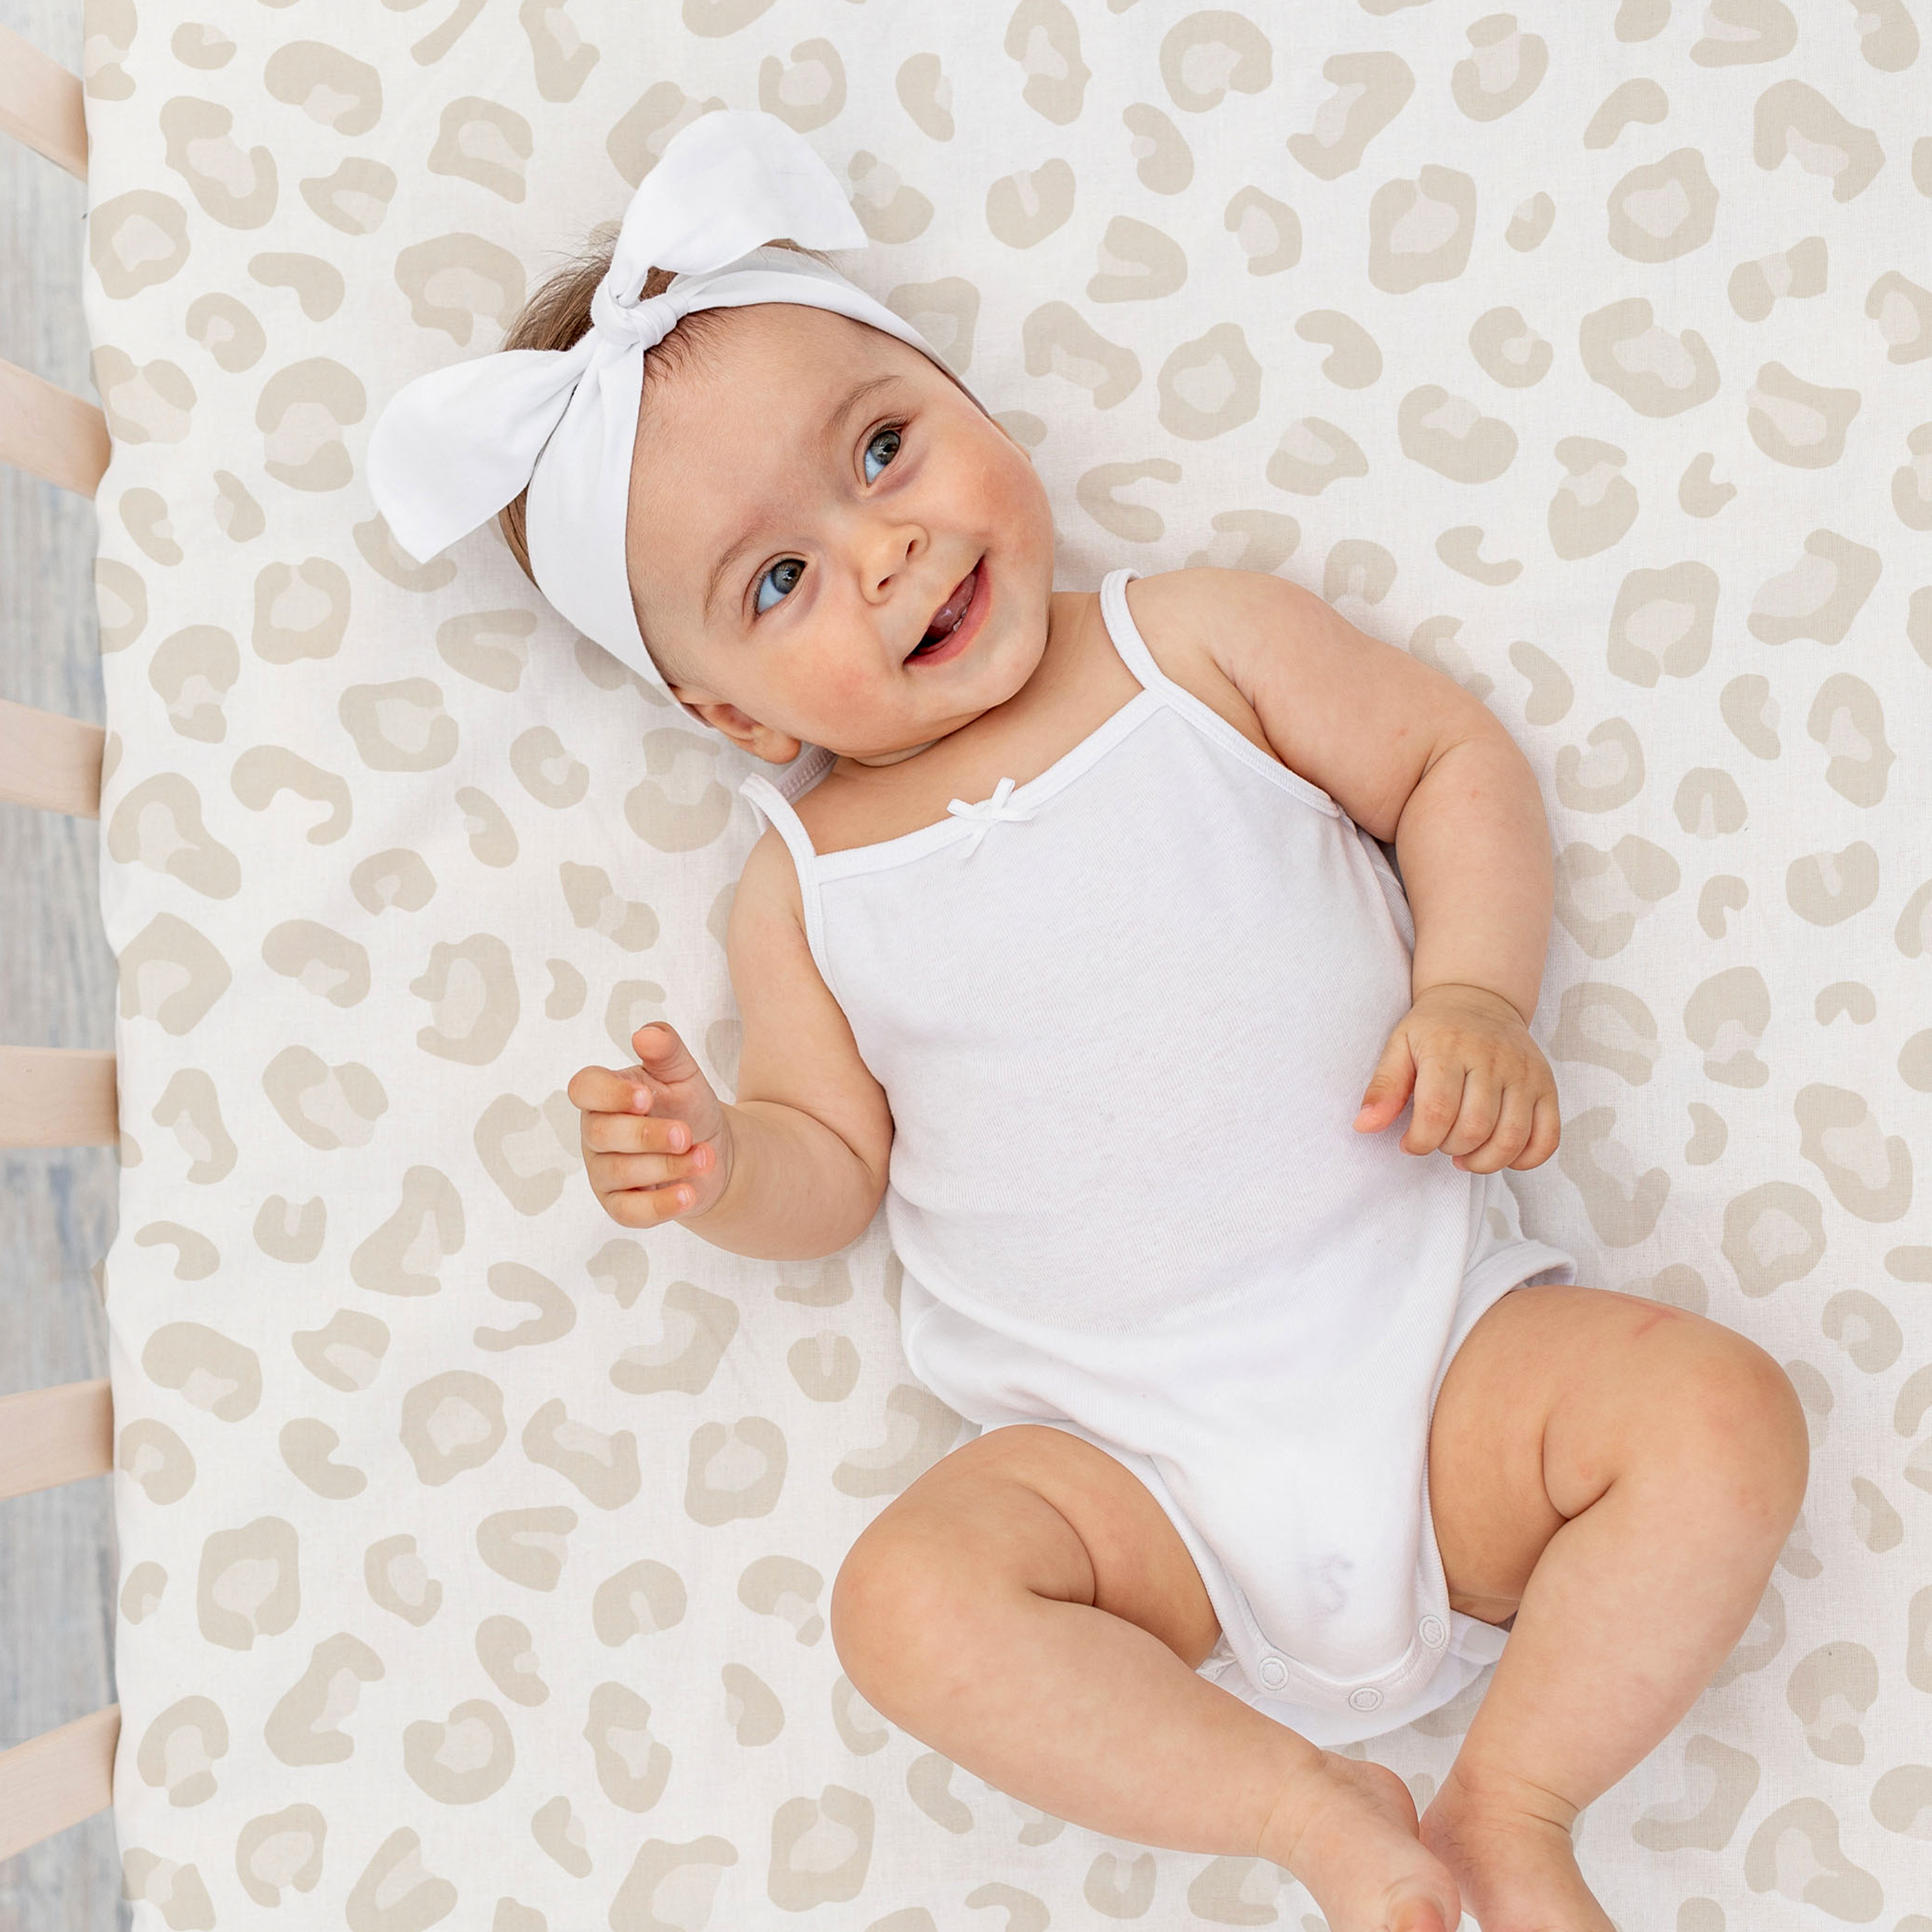 A smiling baby wearing a white onesie and a matching headband lies on a patterned blanket, looking upward with joy on a Mini Crib Fitted Sheet Set- Safari & Wild from Makemake Organics.